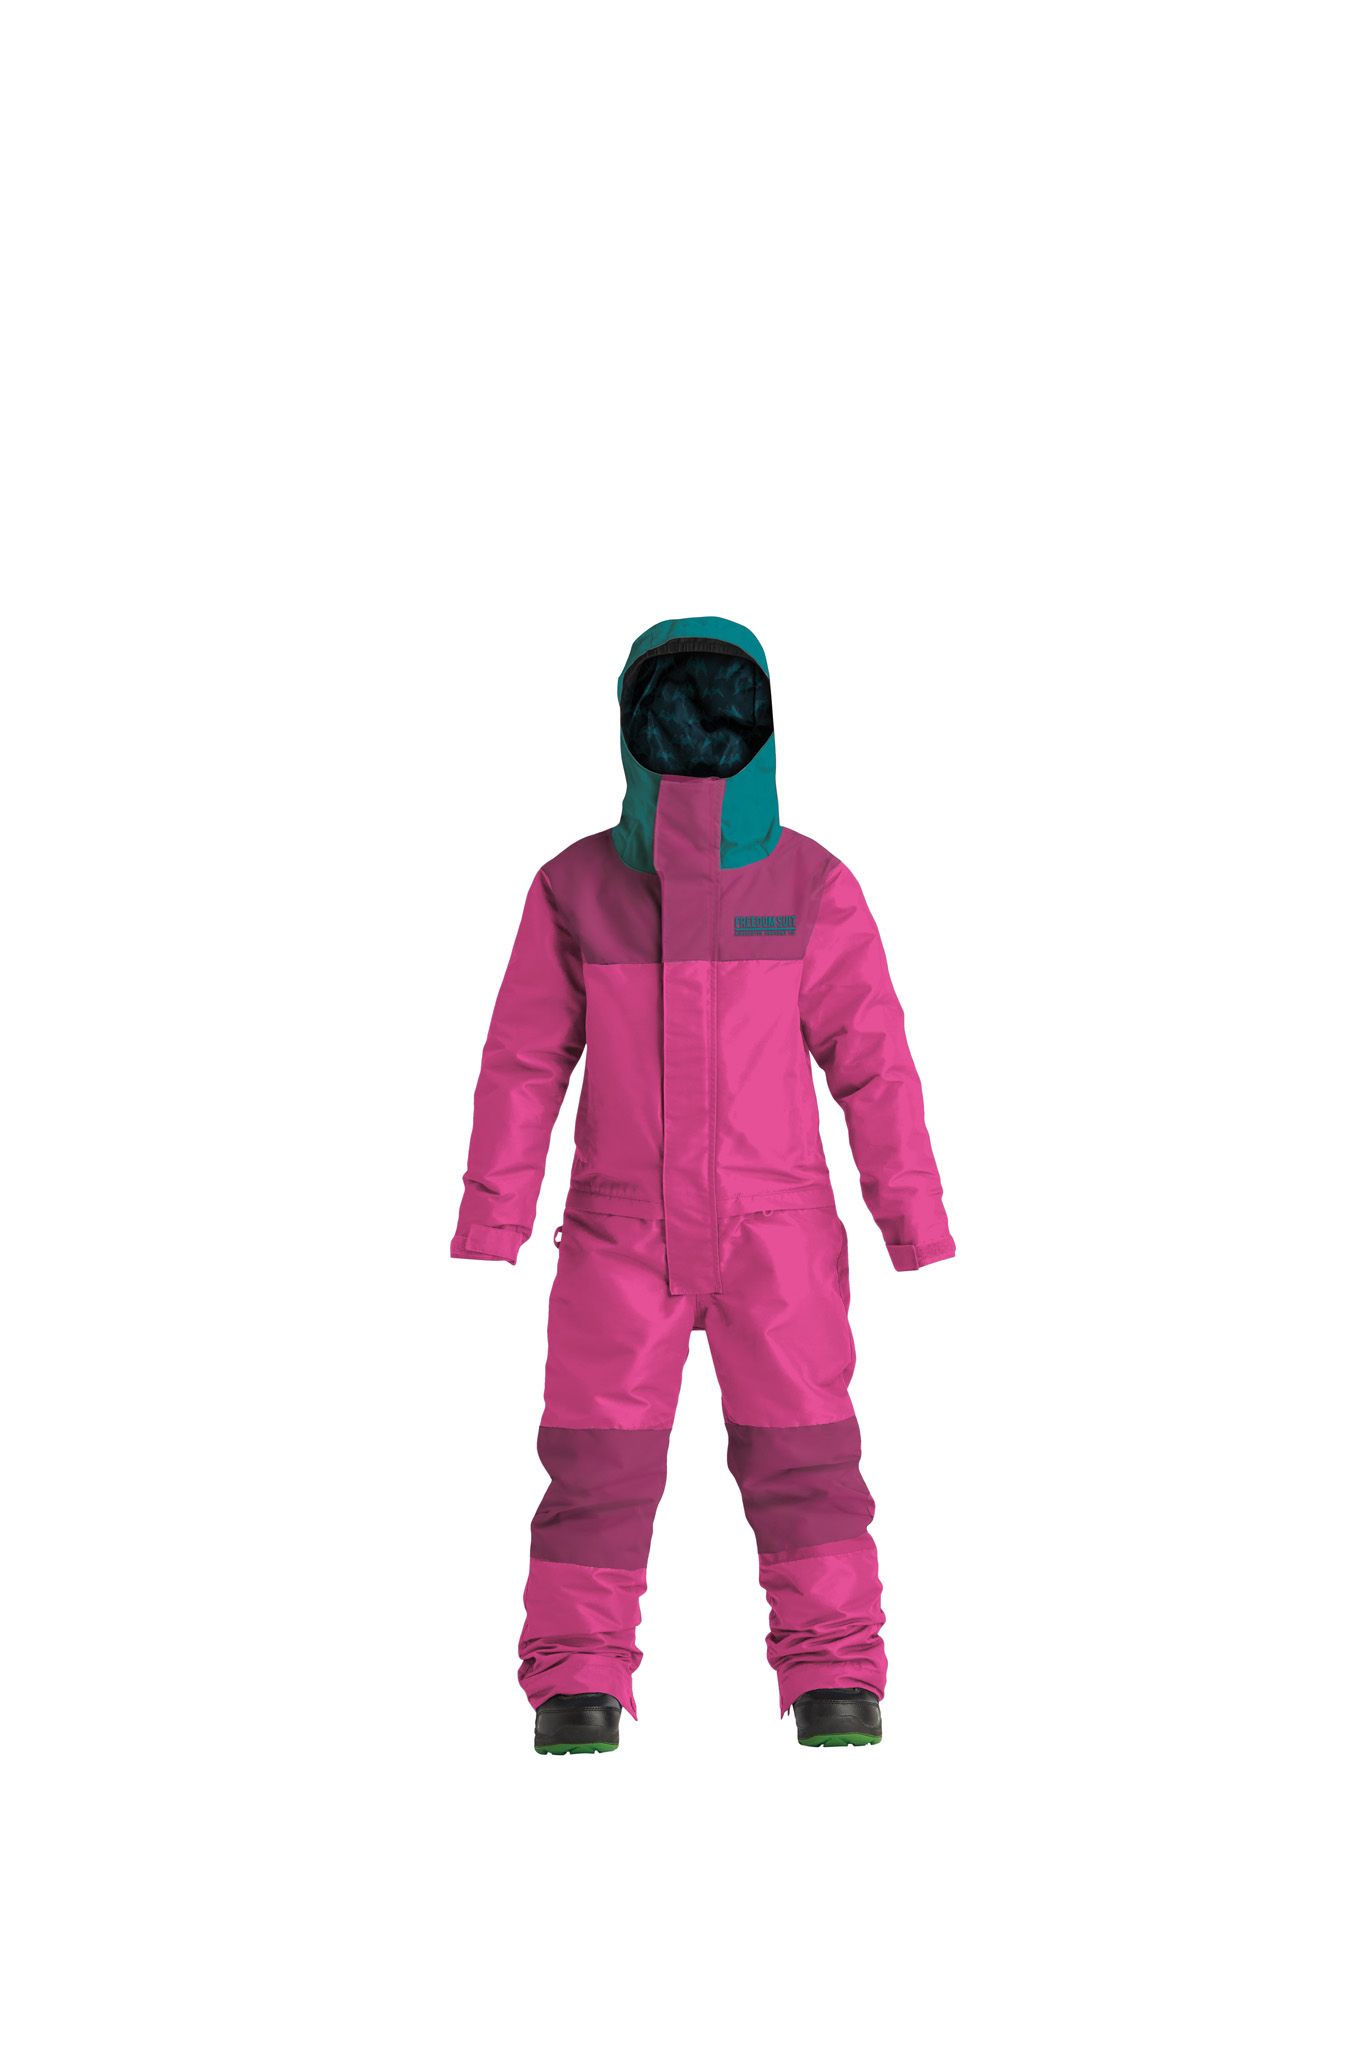 Airblaster Youth Freedom Suit pink